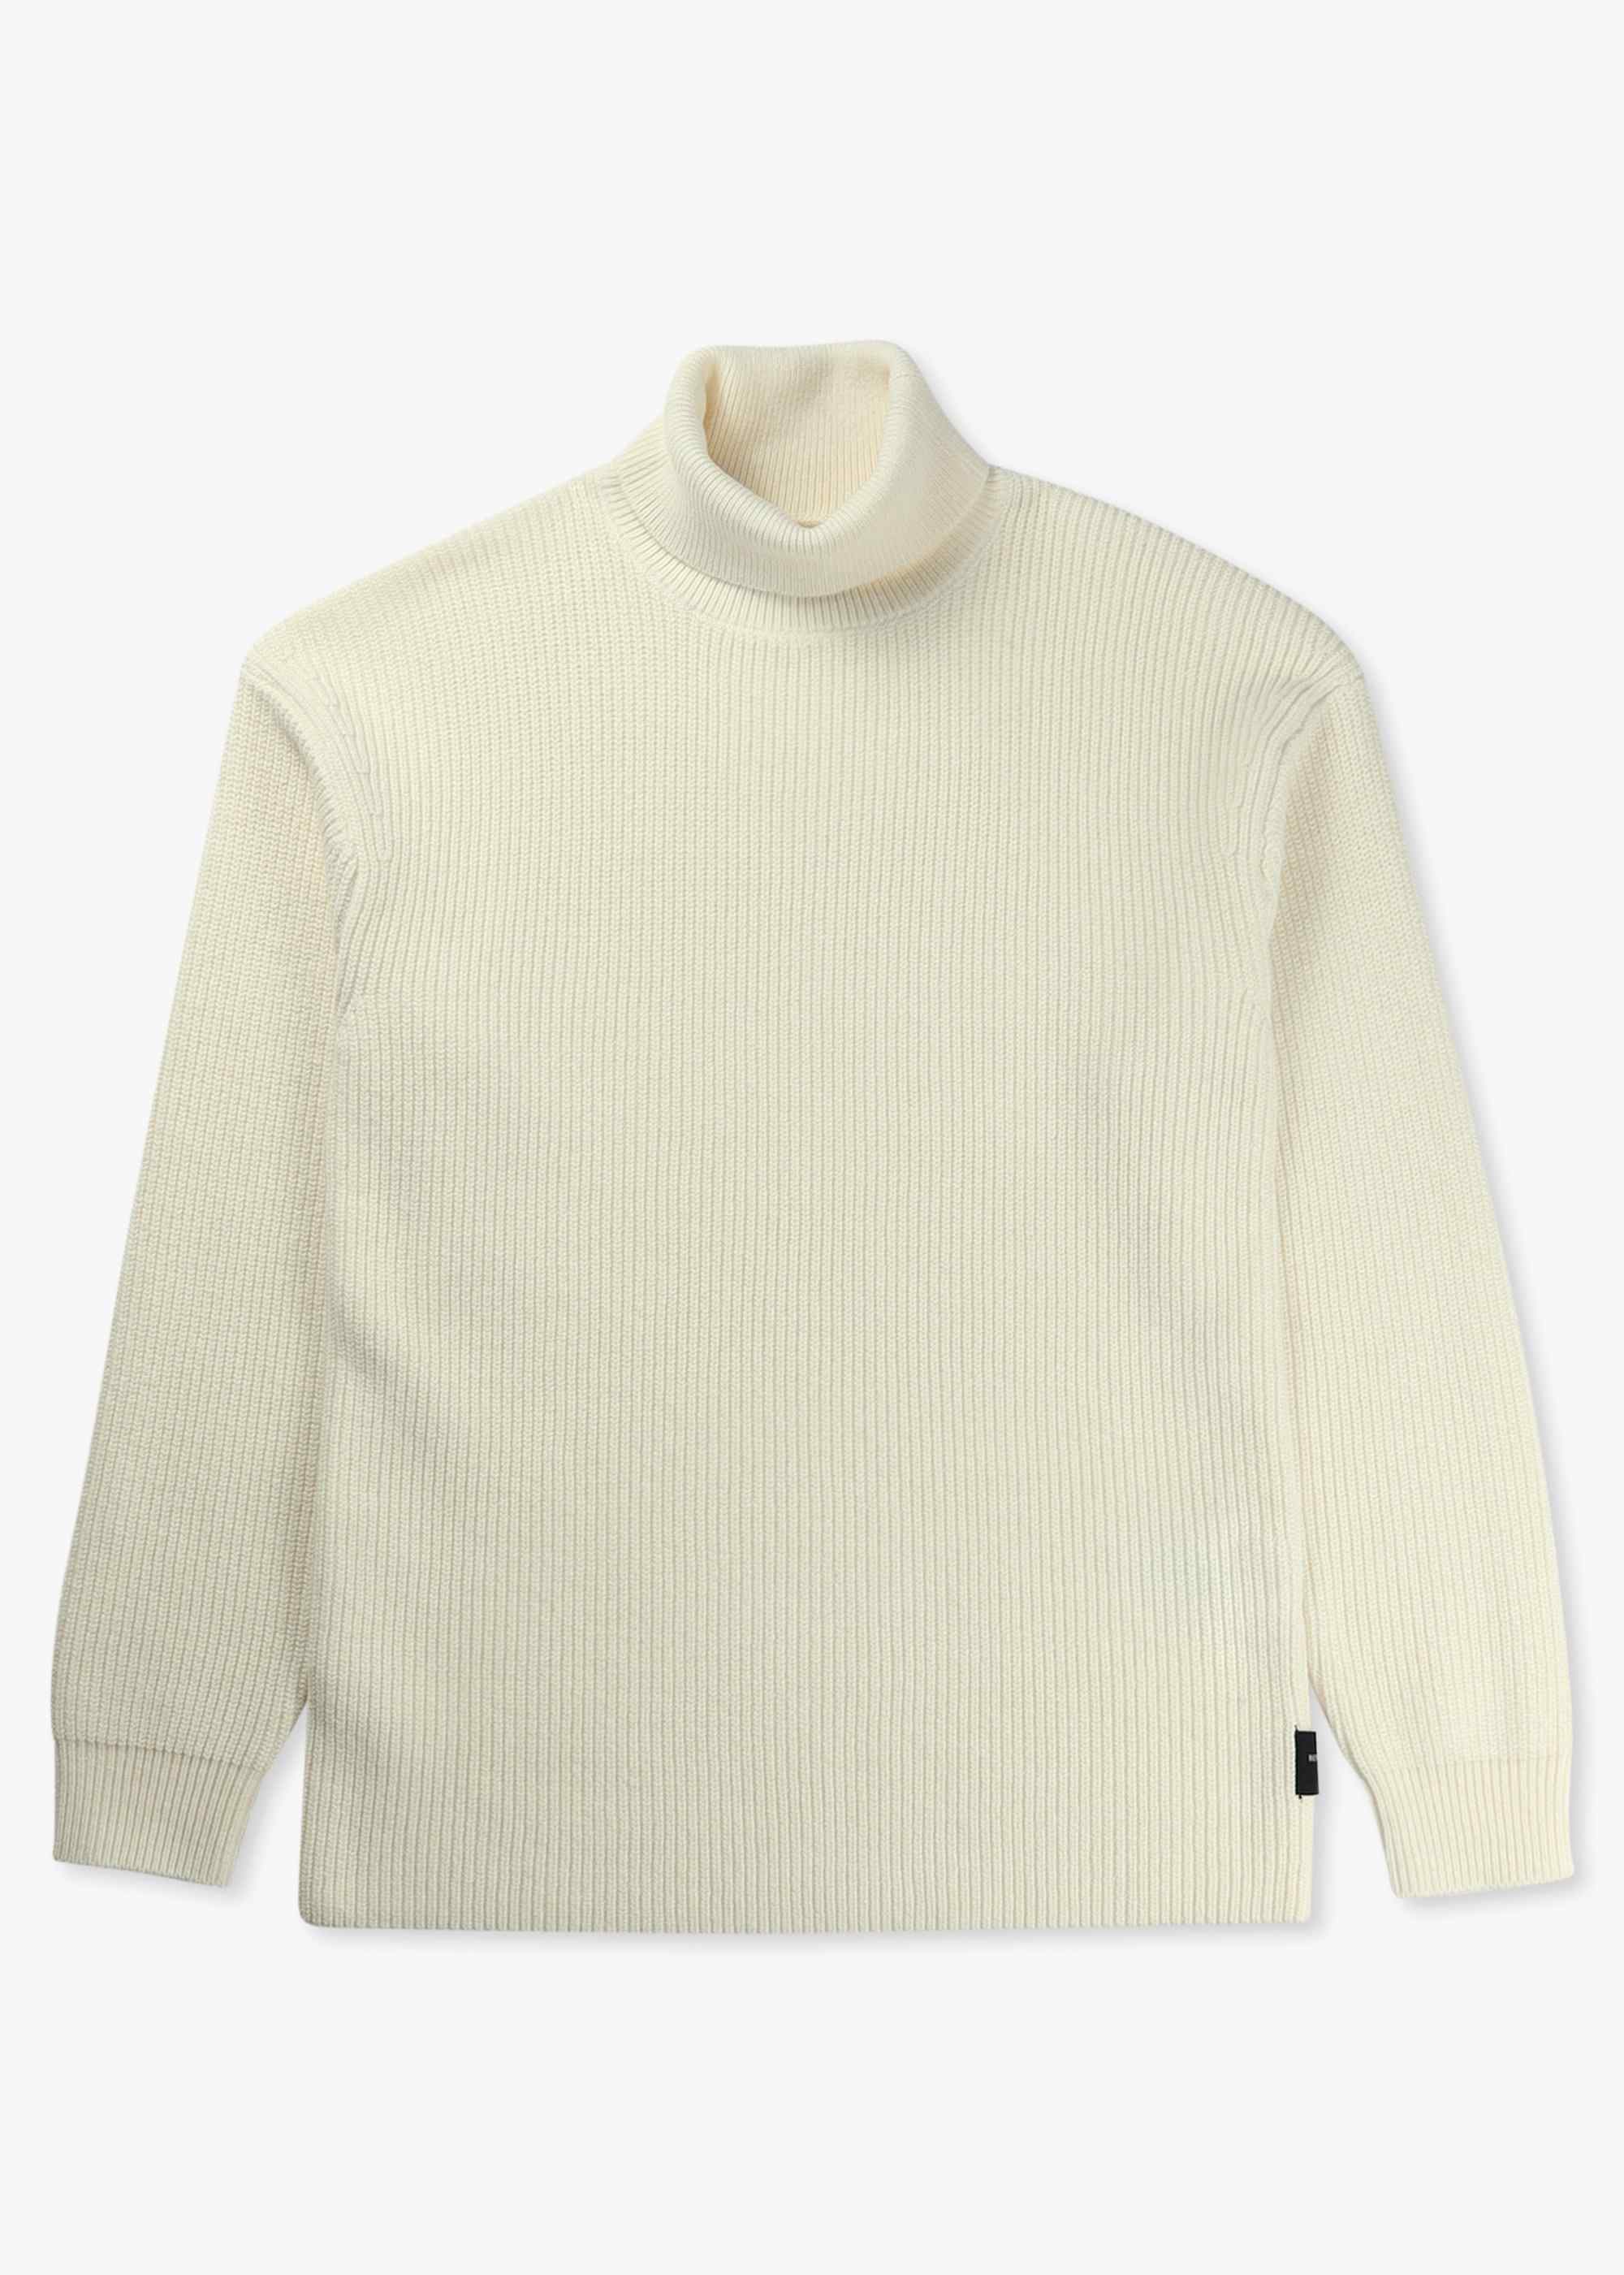 Image of Replay Mens Sartoriale Knitted Sweatshirt In Butter White